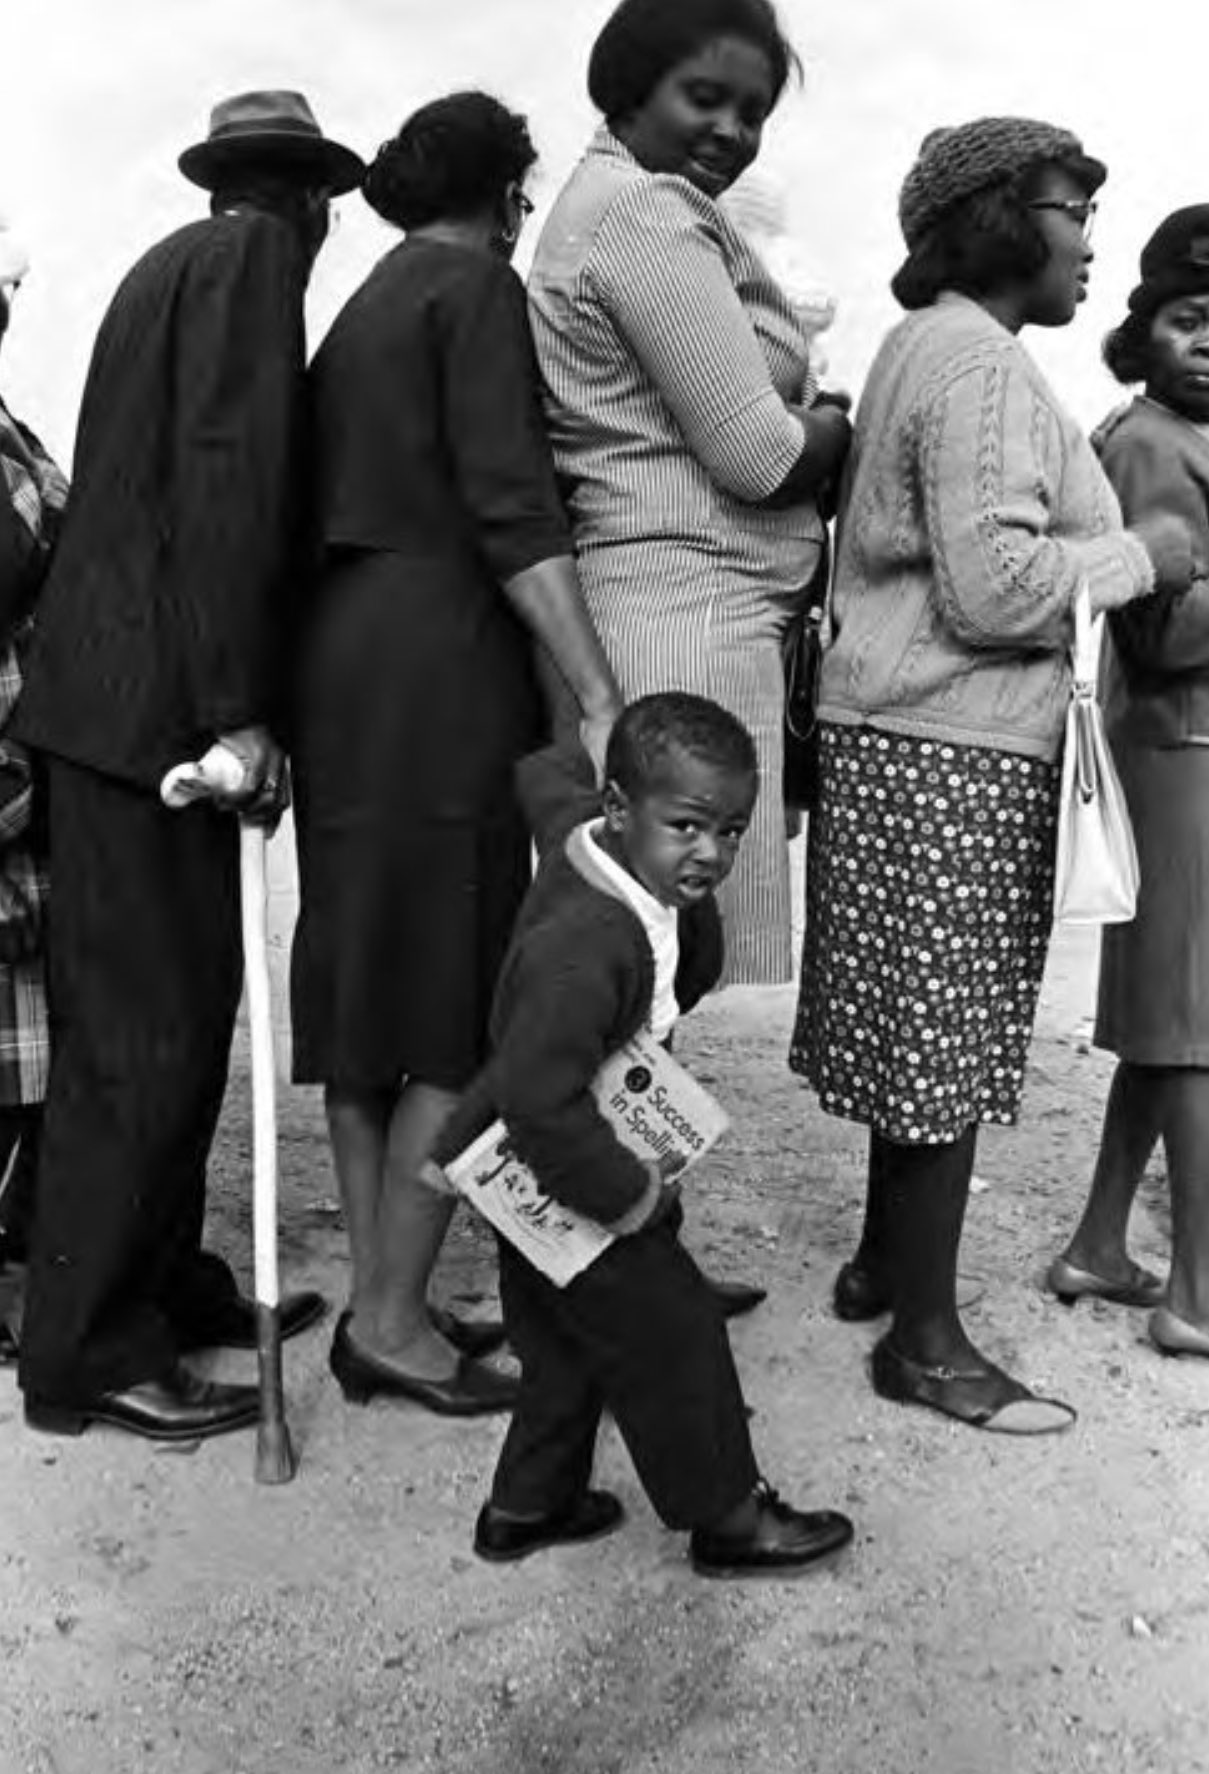 Election Day in Lowndes County, Alabama (November, 1966)

Photographs by Jim Peppler via the Alabama Department of Archives &amp; History https://t.co/oK4tliRQ6O